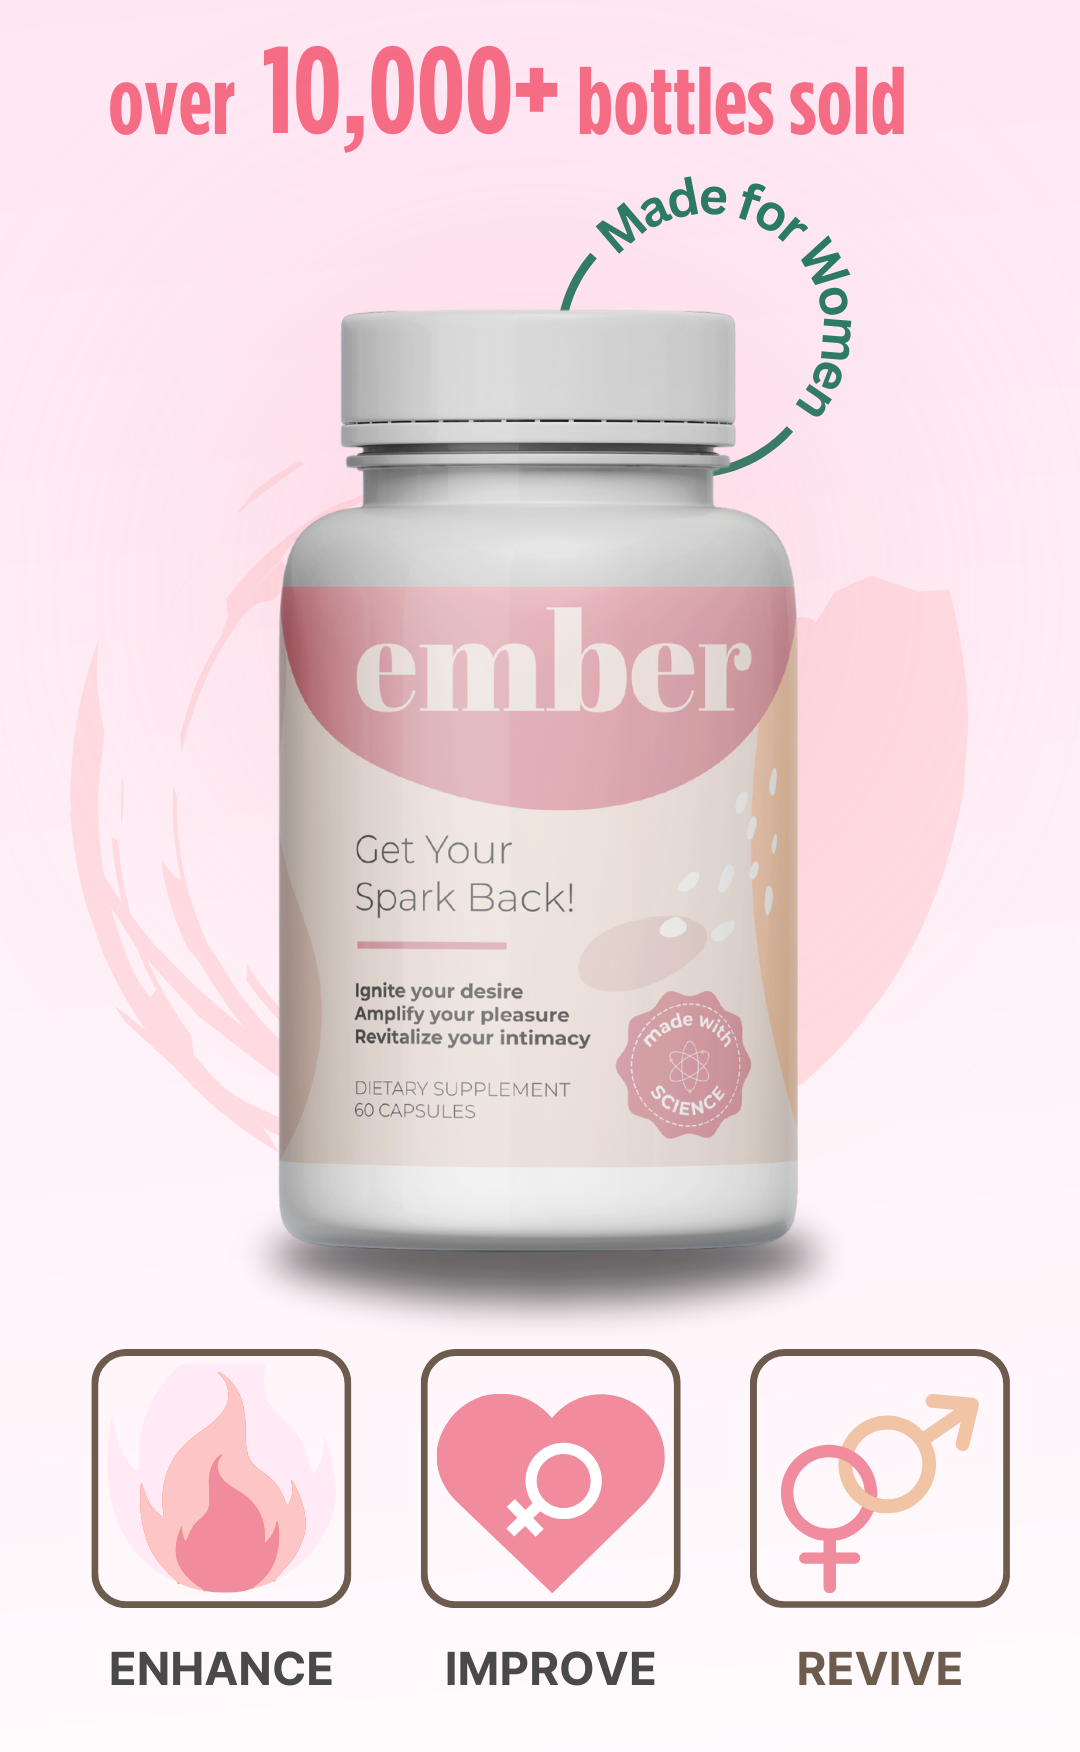 Bottle of 'ember' dietary supplement for women with claims of enhancing pleasure and intimacy.